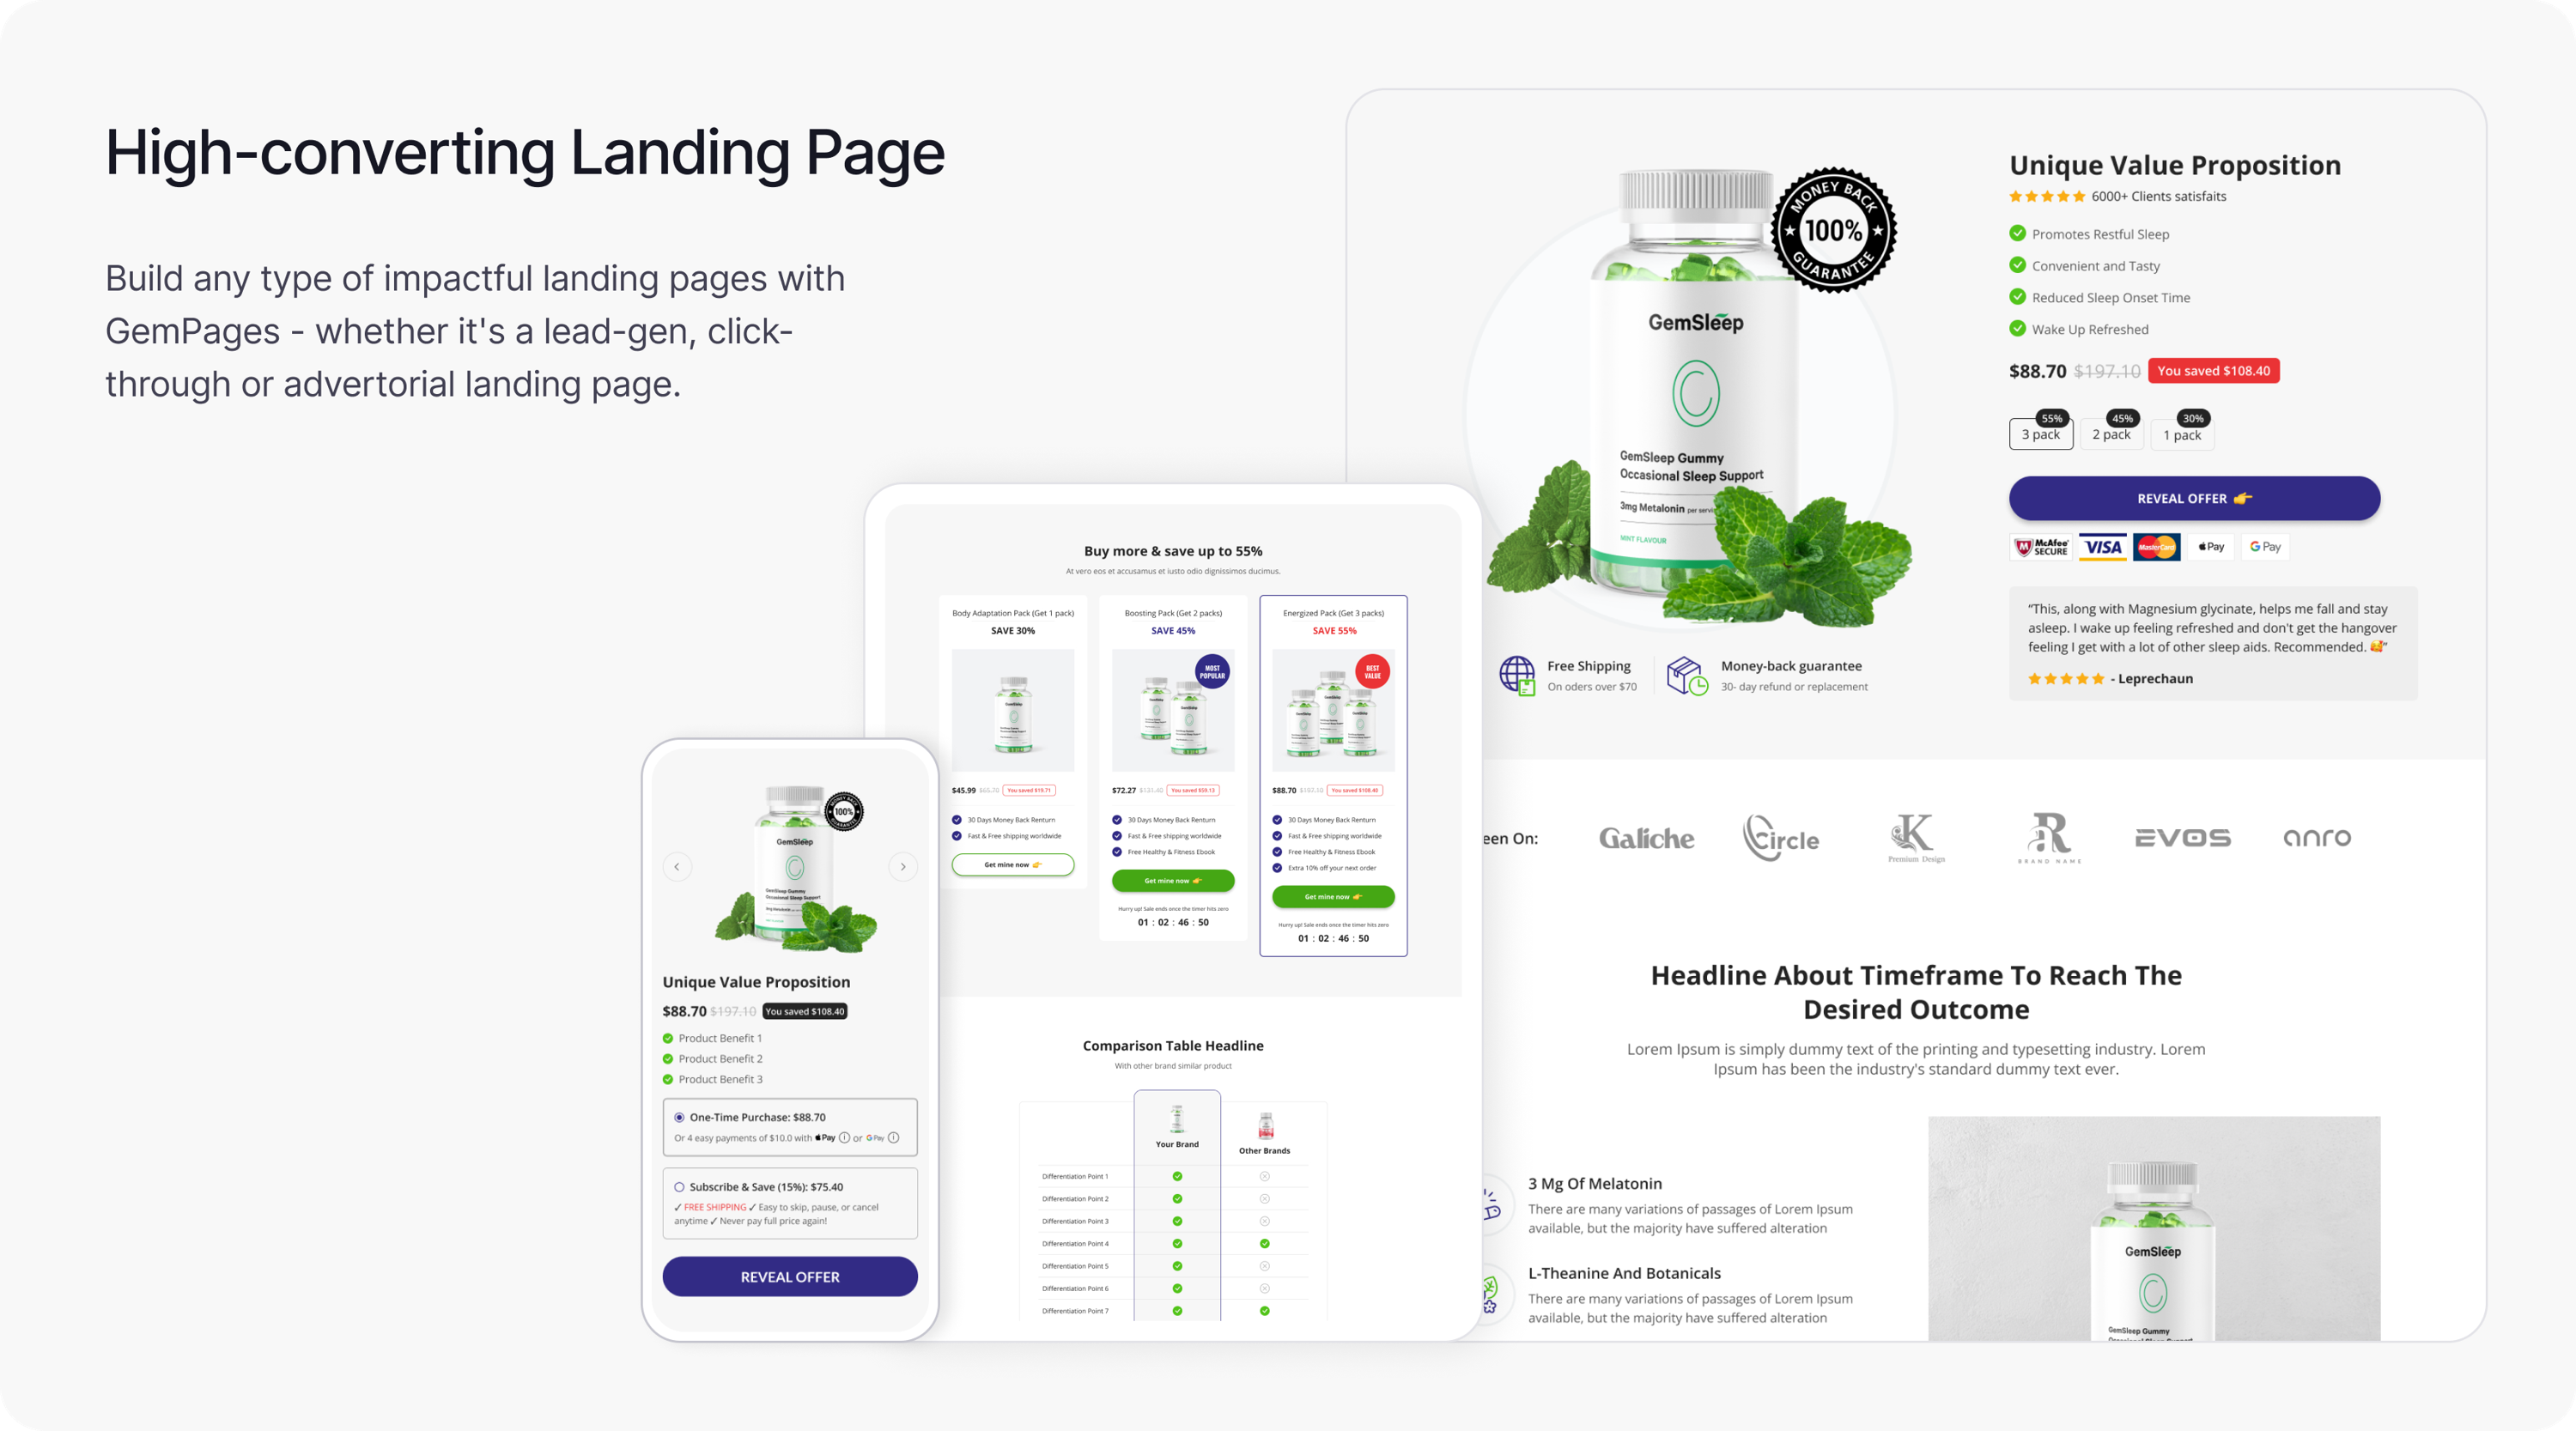 high-converting landing page with GemPages